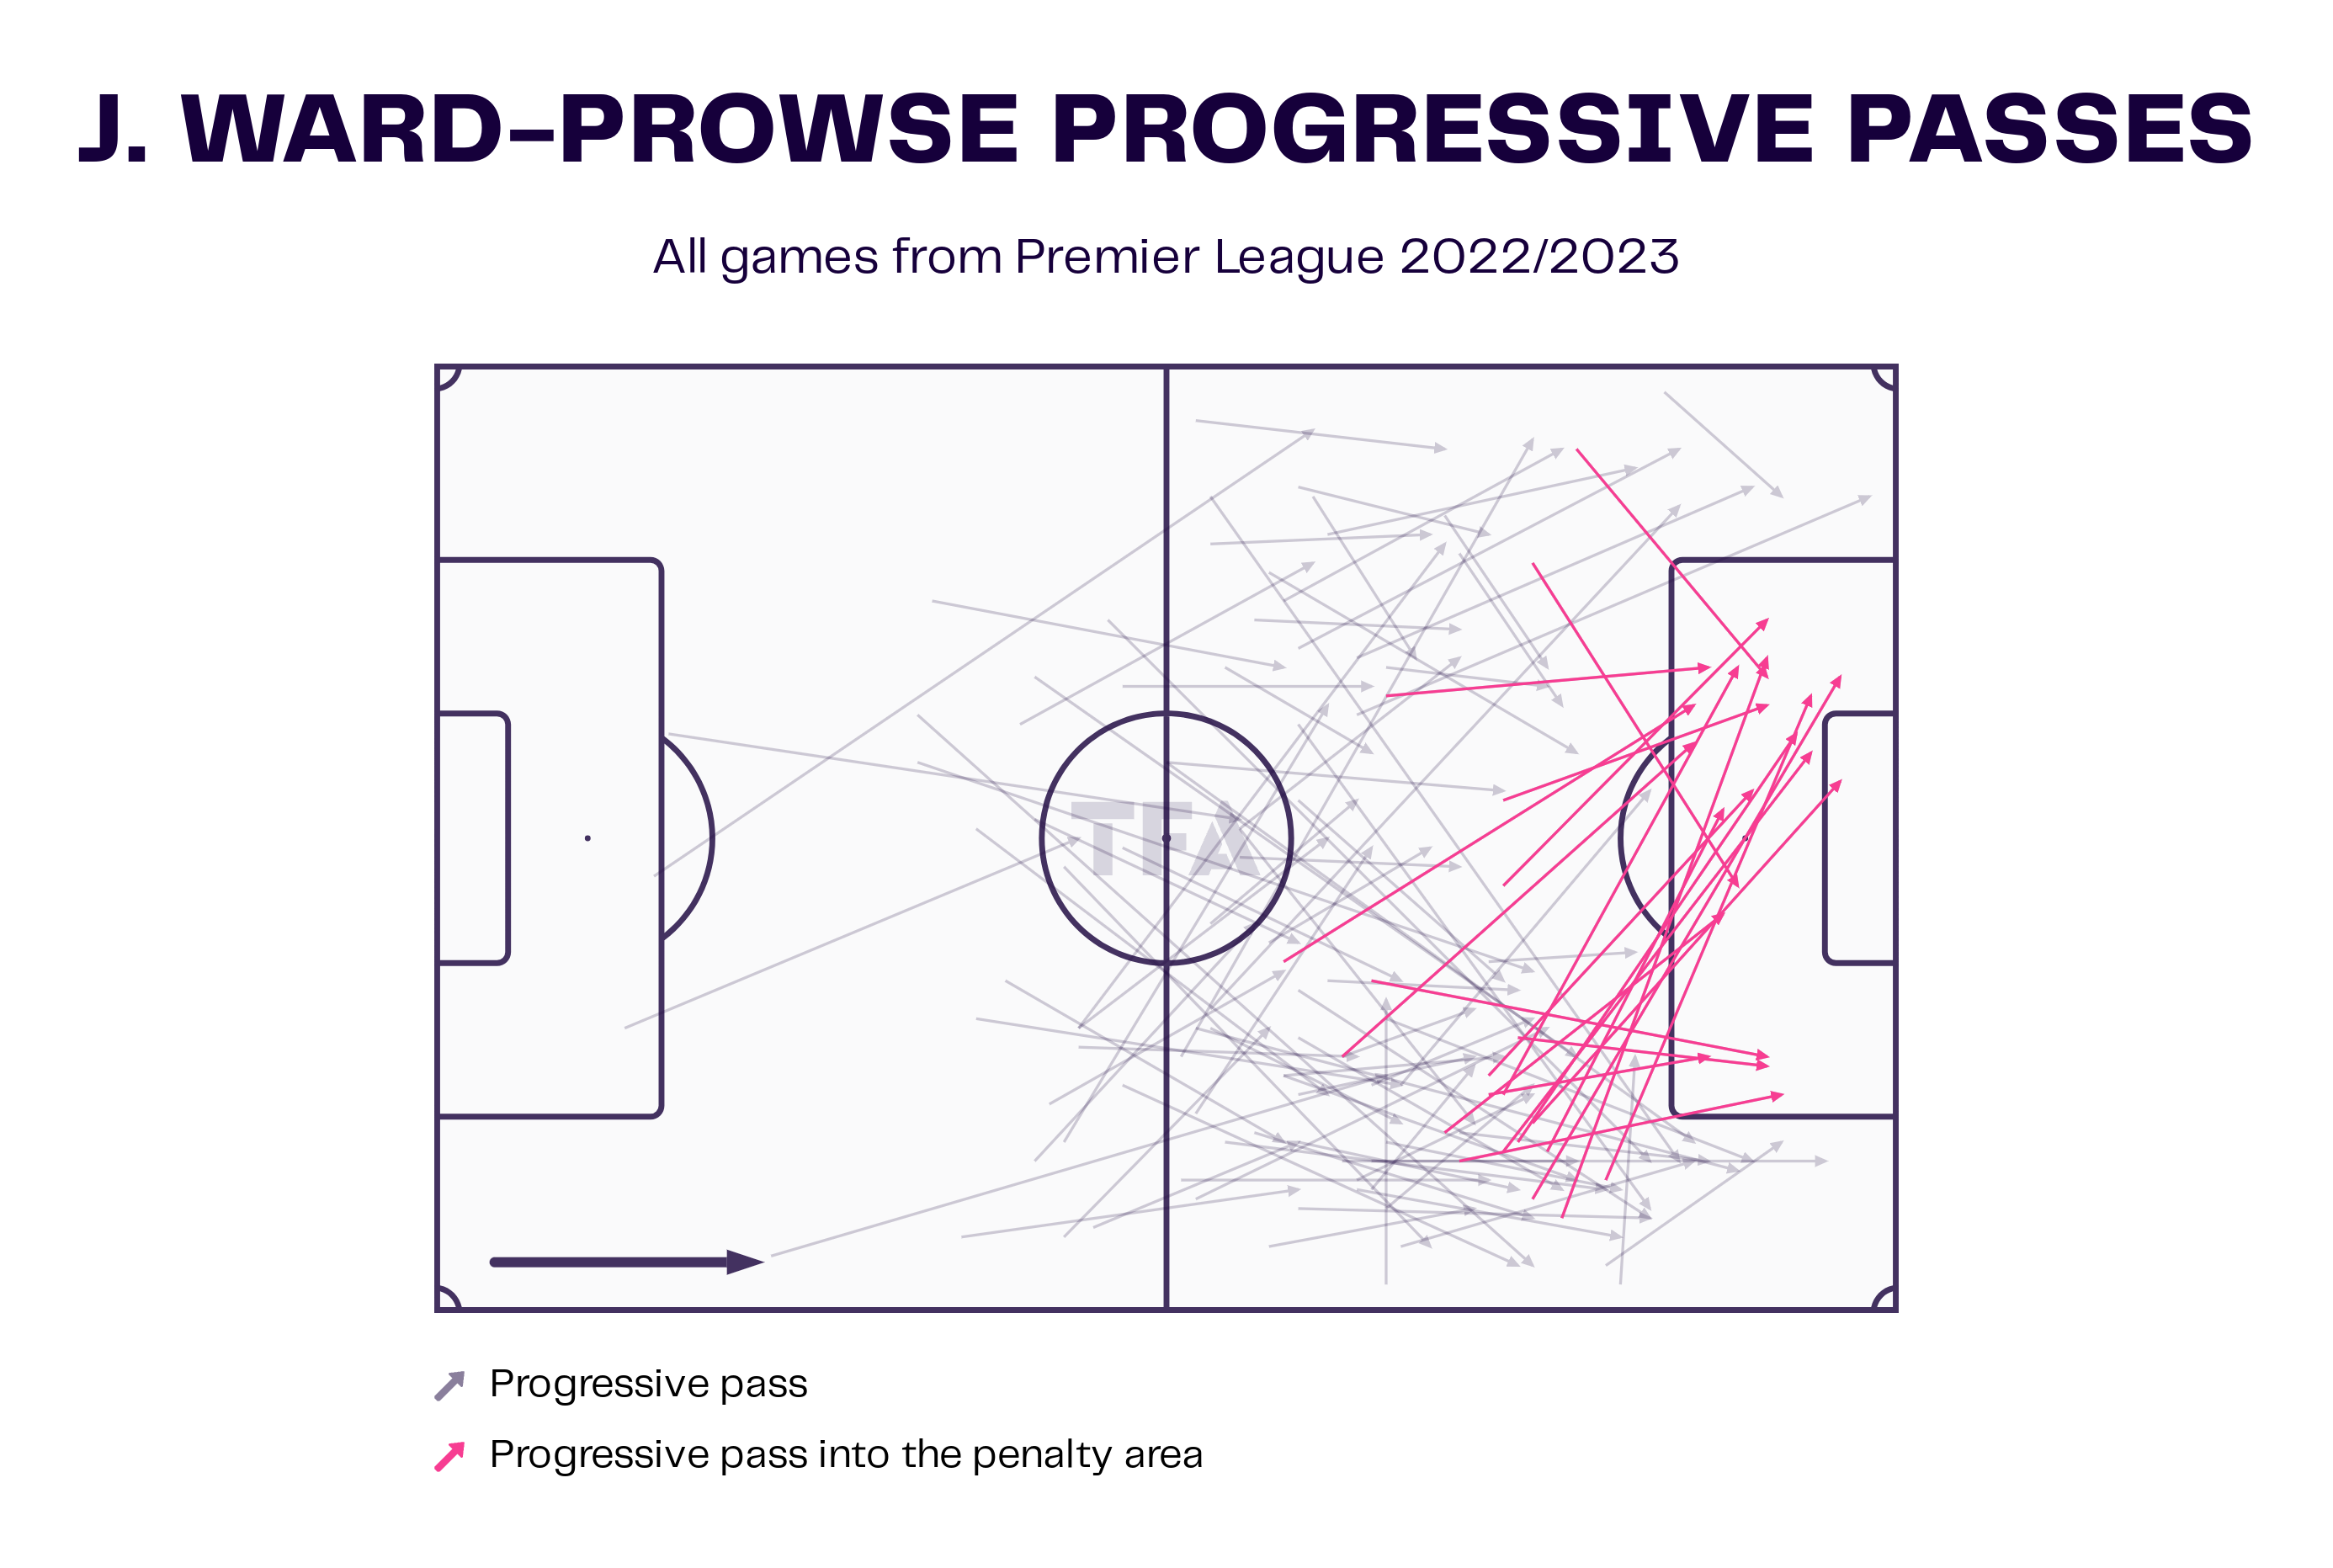 James Ward-Prowse – Southampton: English Premier League 2022-23 Data, Stats, Analysis and Scout report